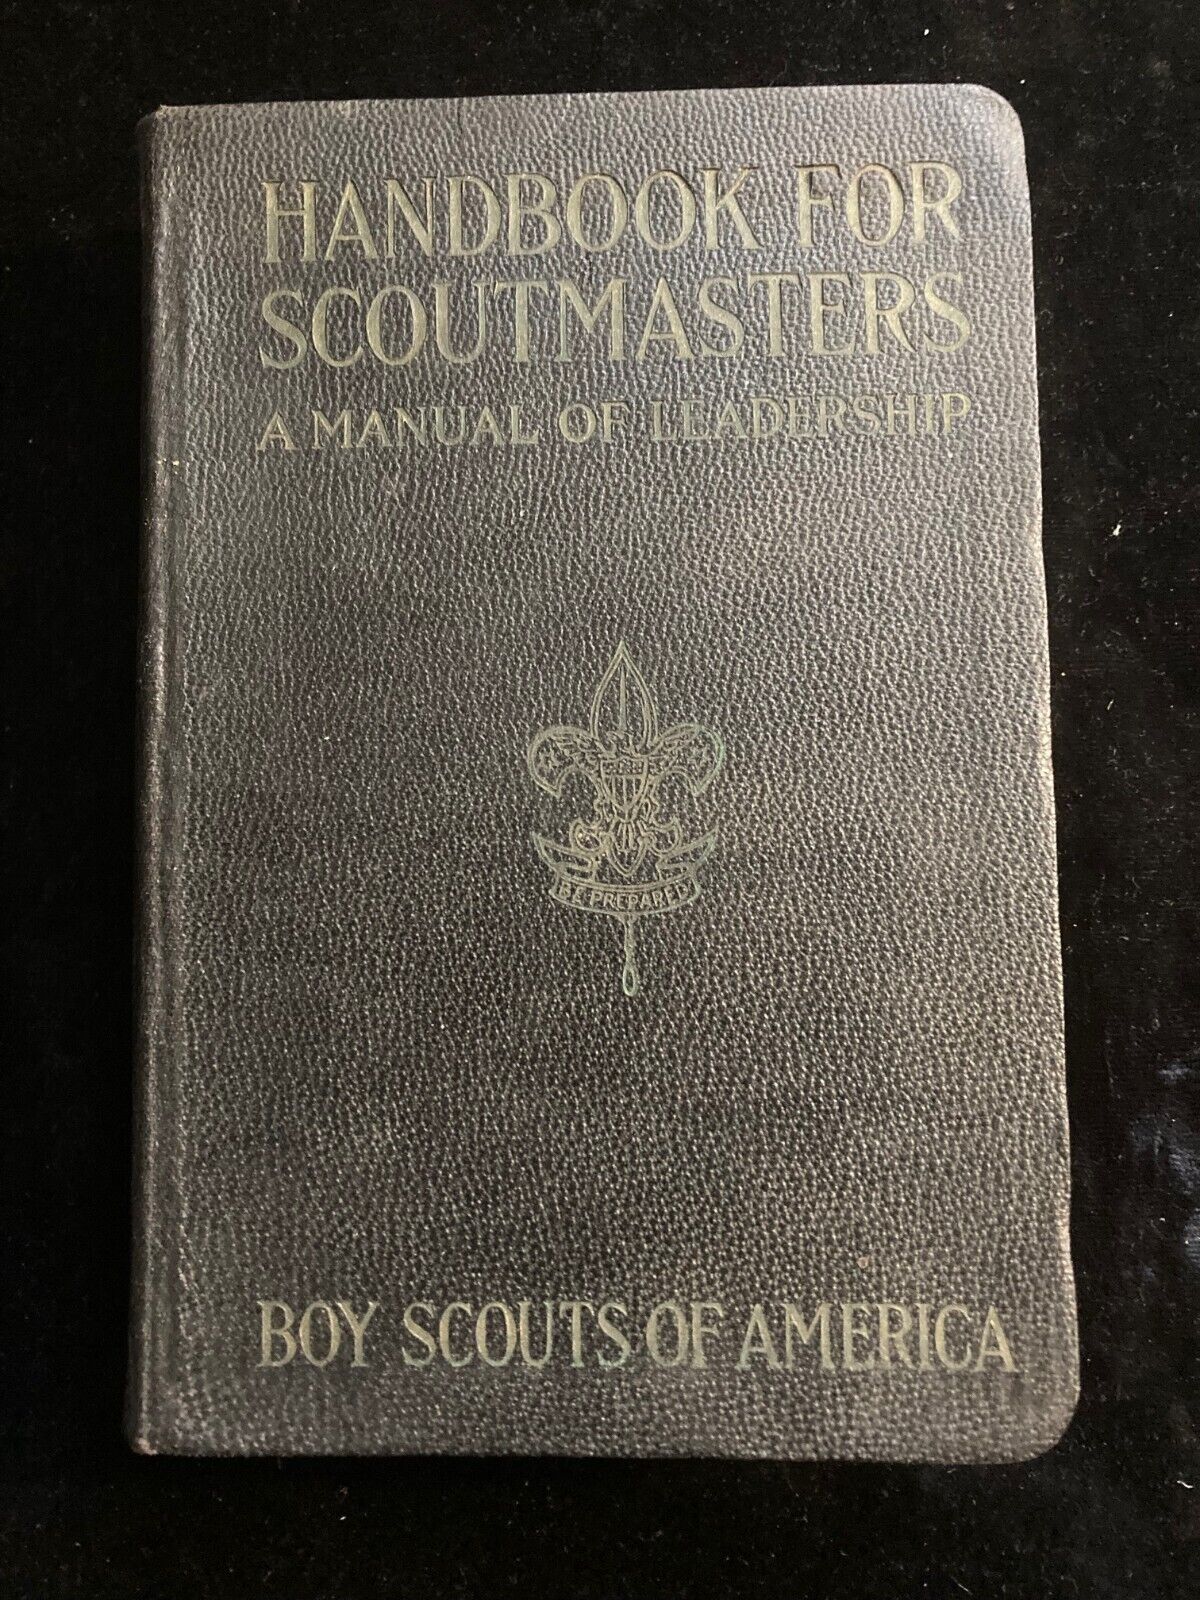 Handbook for Scoutmasters Boy Scouts of America 2nd Edition 2nd Imprint 1920